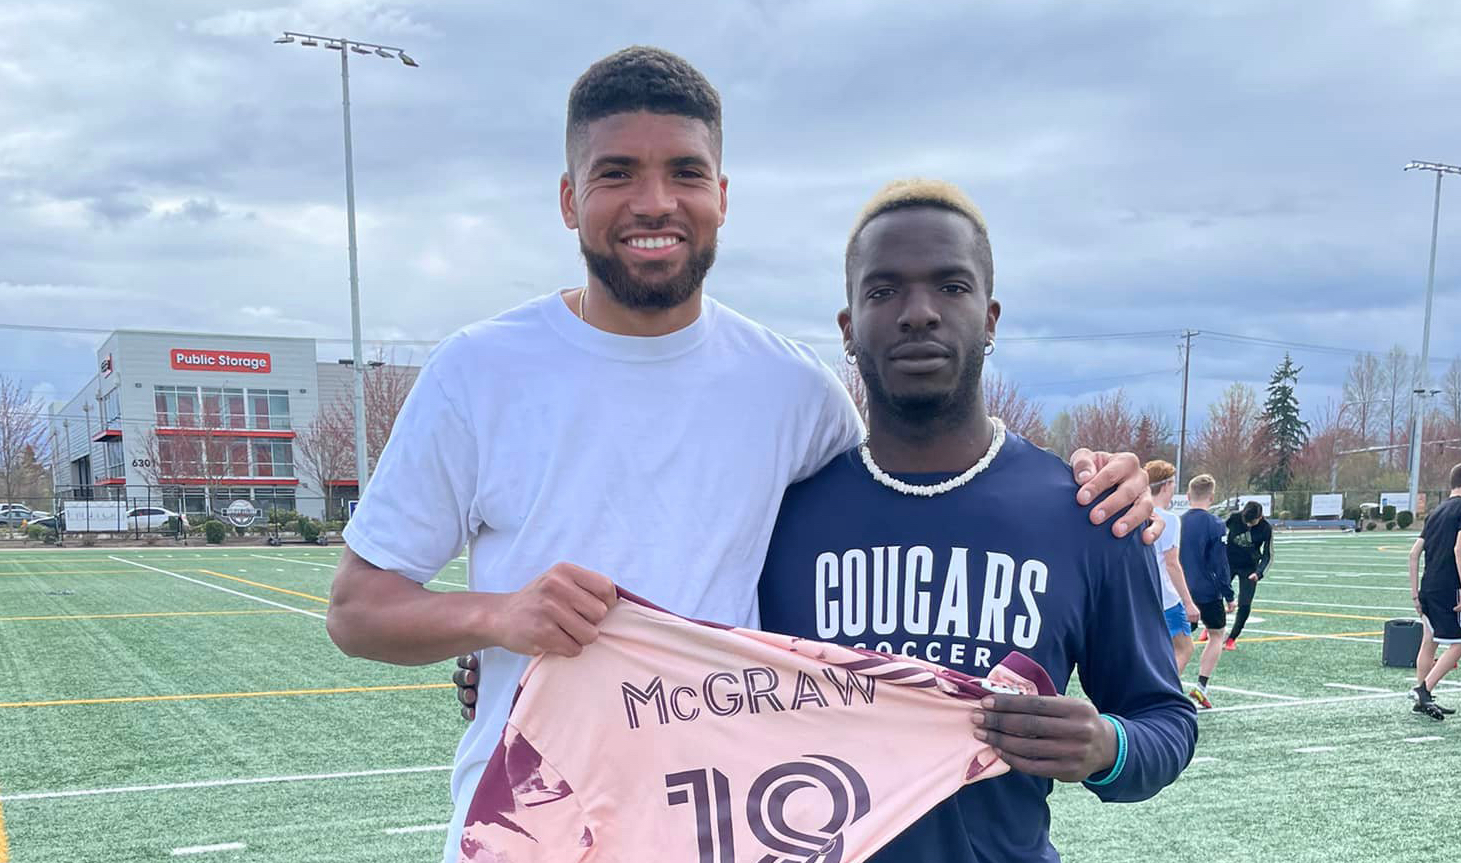 Portland Timbers player Zac McGraw poses with Seton Catholic senior David Moore after the Timbers player came out to Seton's practice Monday to talk to the team about race issues.